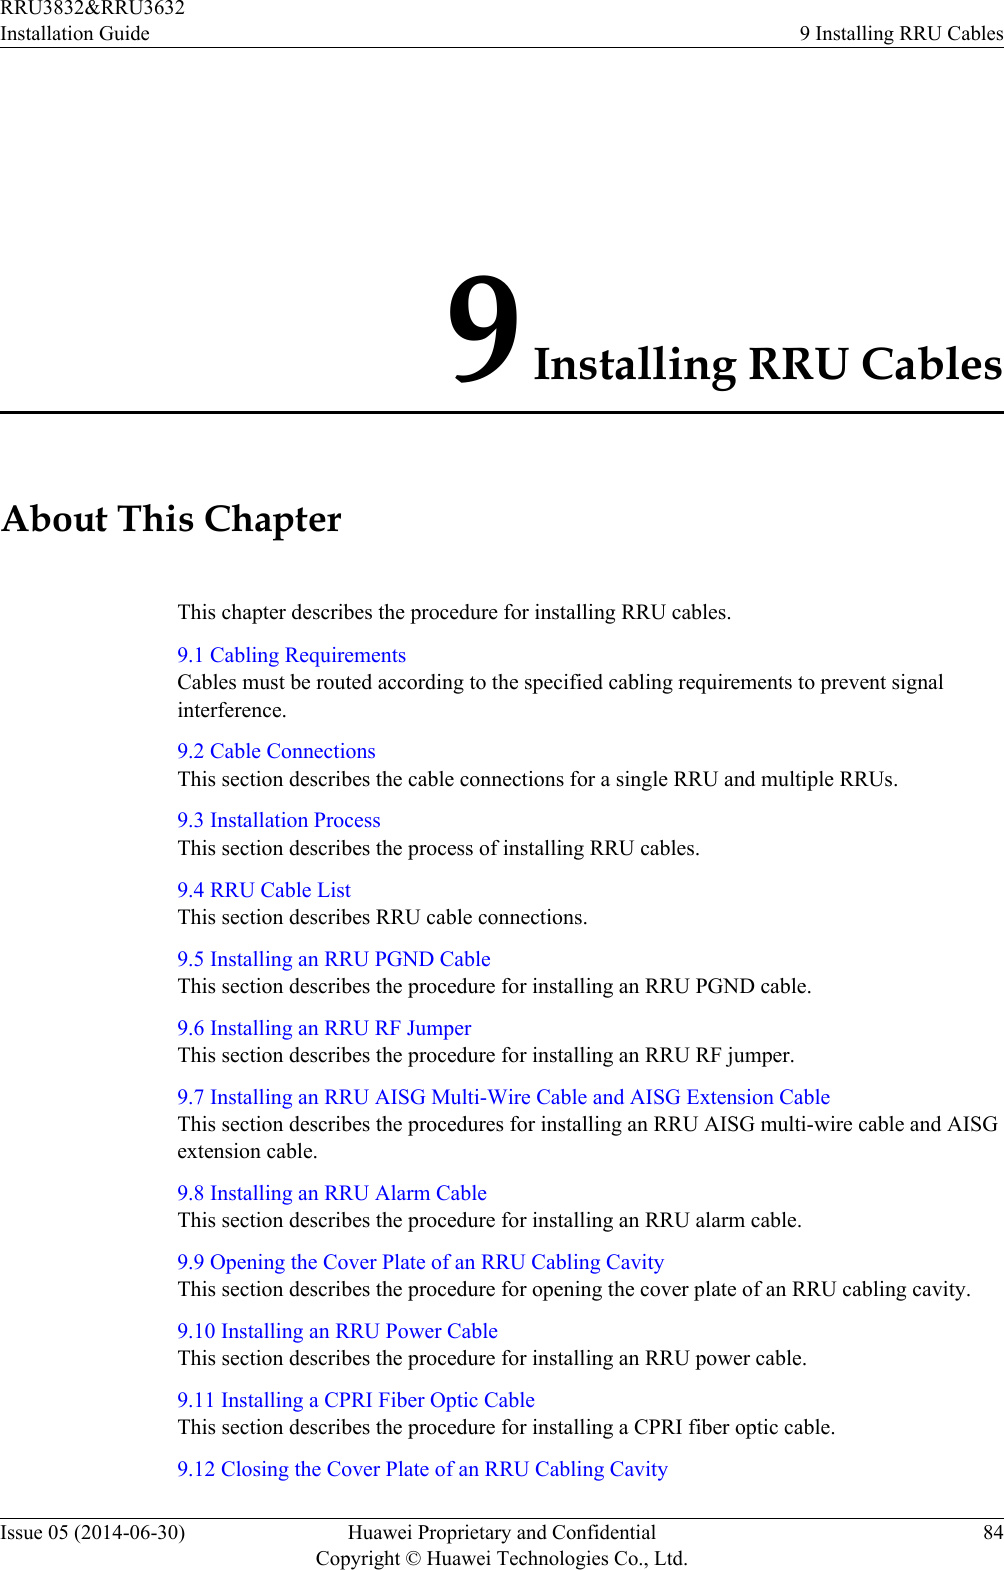 9 Installing RRU CablesAbout This ChapterThis chapter describes the procedure for installing RRU cables.9.1 Cabling RequirementsCables must be routed according to the specified cabling requirements to prevent signalinterference.9.2 Cable ConnectionsThis section describes the cable connections for a single RRU and multiple RRUs.9.3 Installation ProcessThis section describes the process of installing RRU cables.9.4 RRU Cable ListThis section describes RRU cable connections.9.5 Installing an RRU PGND CableThis section describes the procedure for installing an RRU PGND cable.9.6 Installing an RRU RF JumperThis section describes the procedure for installing an RRU RF jumper.9.7 Installing an RRU AISG Multi-Wire Cable and AISG Extension CableThis section describes the procedures for installing an RRU AISG multi-wire cable and AISGextension cable.9.8 Installing an RRU Alarm CableThis section describes the procedure for installing an RRU alarm cable.9.9 Opening the Cover Plate of an RRU Cabling CavityThis section describes the procedure for opening the cover plate of an RRU cabling cavity.9.10 Installing an RRU Power CableThis section describes the procedure for installing an RRU power cable.9.11 Installing a CPRI Fiber Optic CableThis section describes the procedure for installing a CPRI fiber optic cable.9.12 Closing the Cover Plate of an RRU Cabling CavityRRU3832&amp;RRU3632Installation Guide 9 Installing RRU CablesIssue 05 (2014-06-30) Huawei Proprietary and ConfidentialCopyright © Huawei Technologies Co., Ltd.84